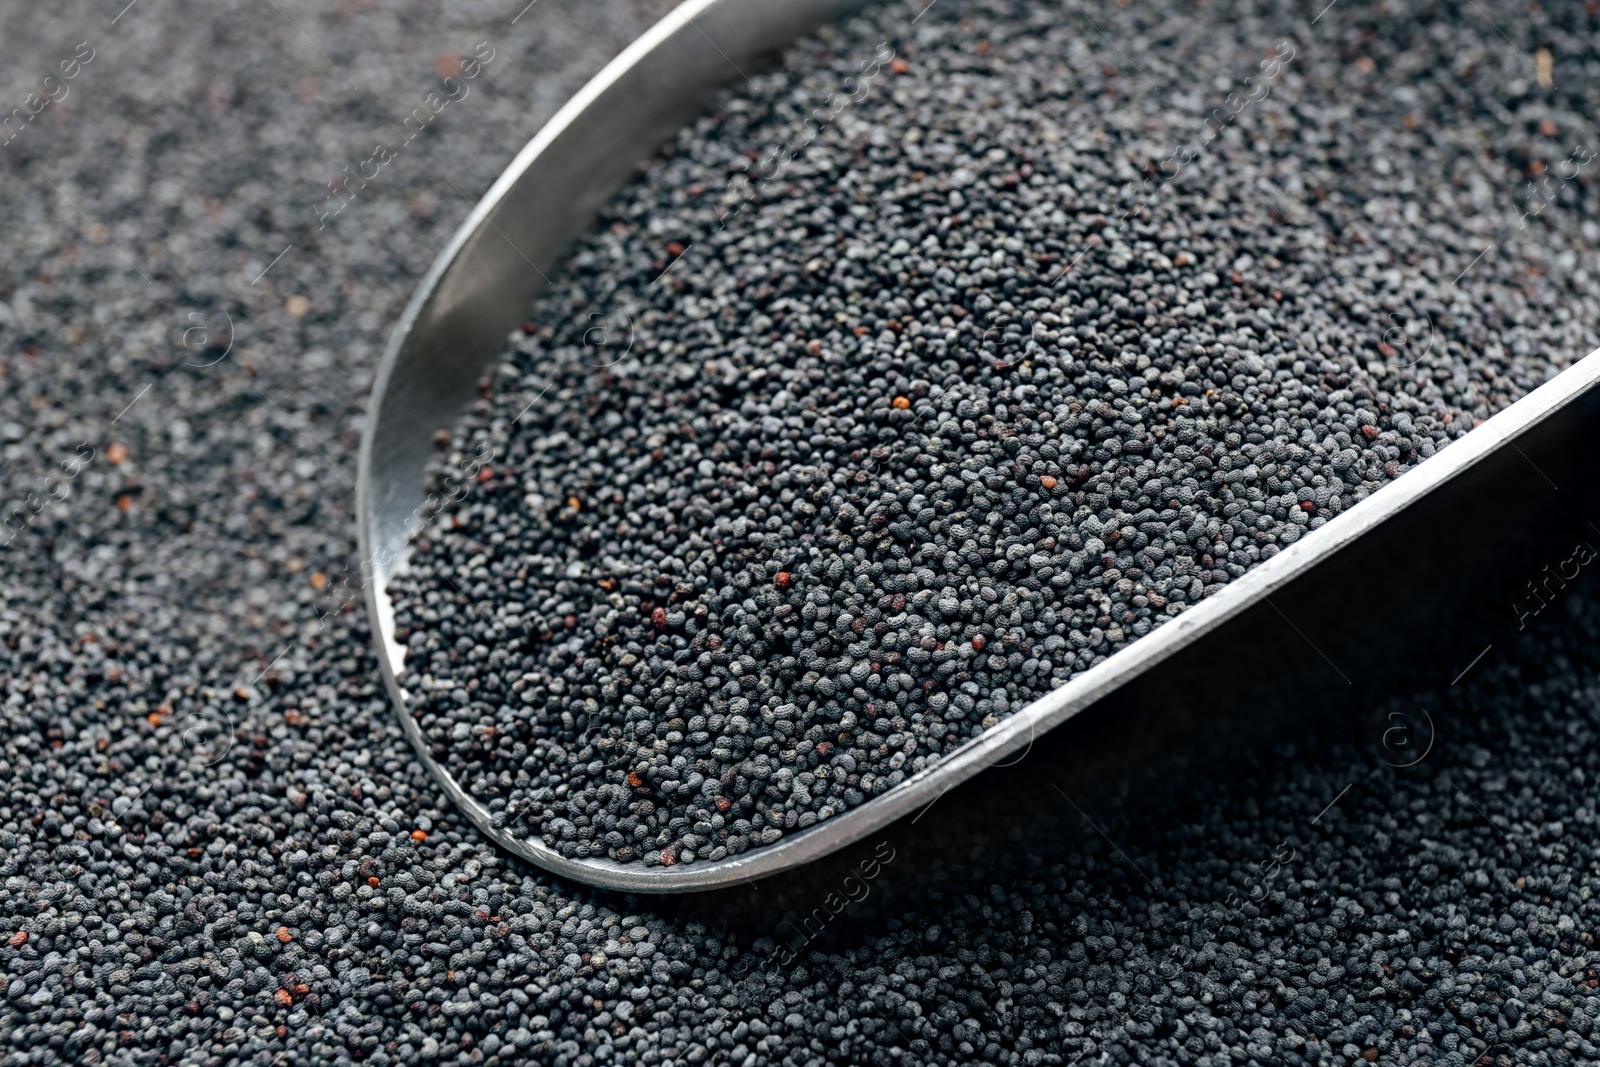 Photo of Poppy seeds and metal scoop, closeup view